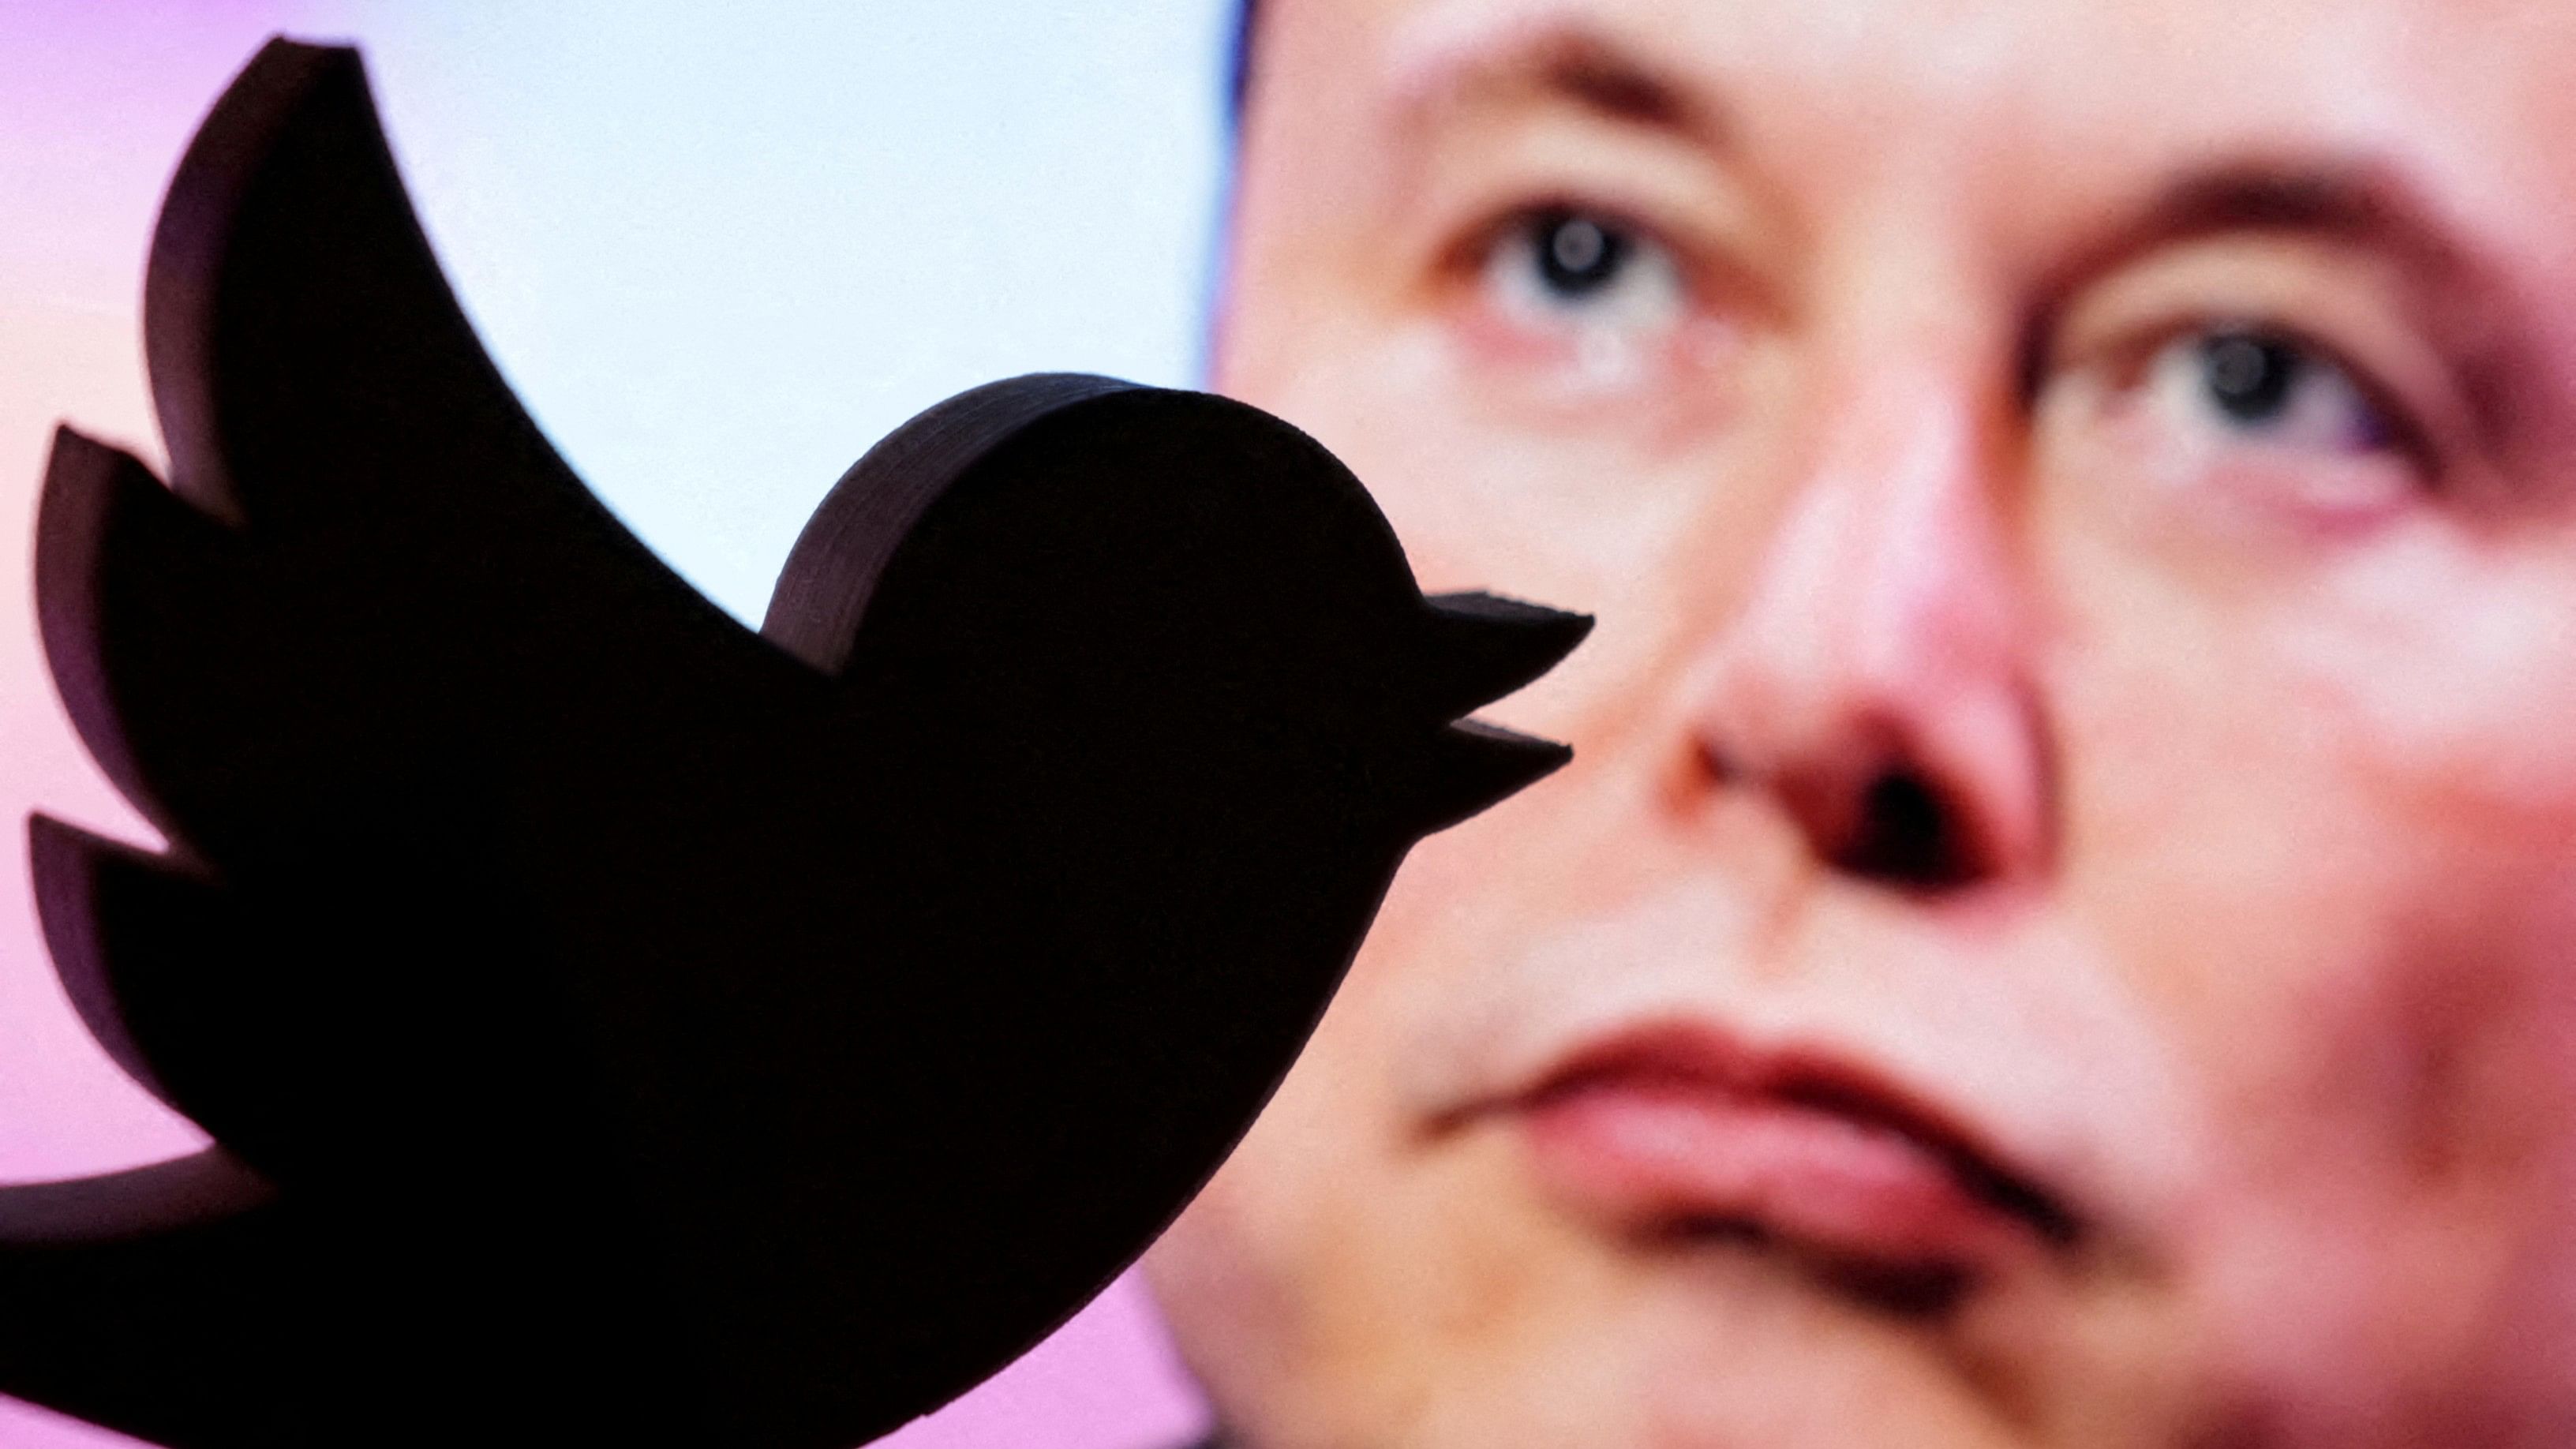 Elon Musk, Twitter’s new owner, has warned repeatedly that his social media company faces dire financial straits. Credit: Reuters Photo